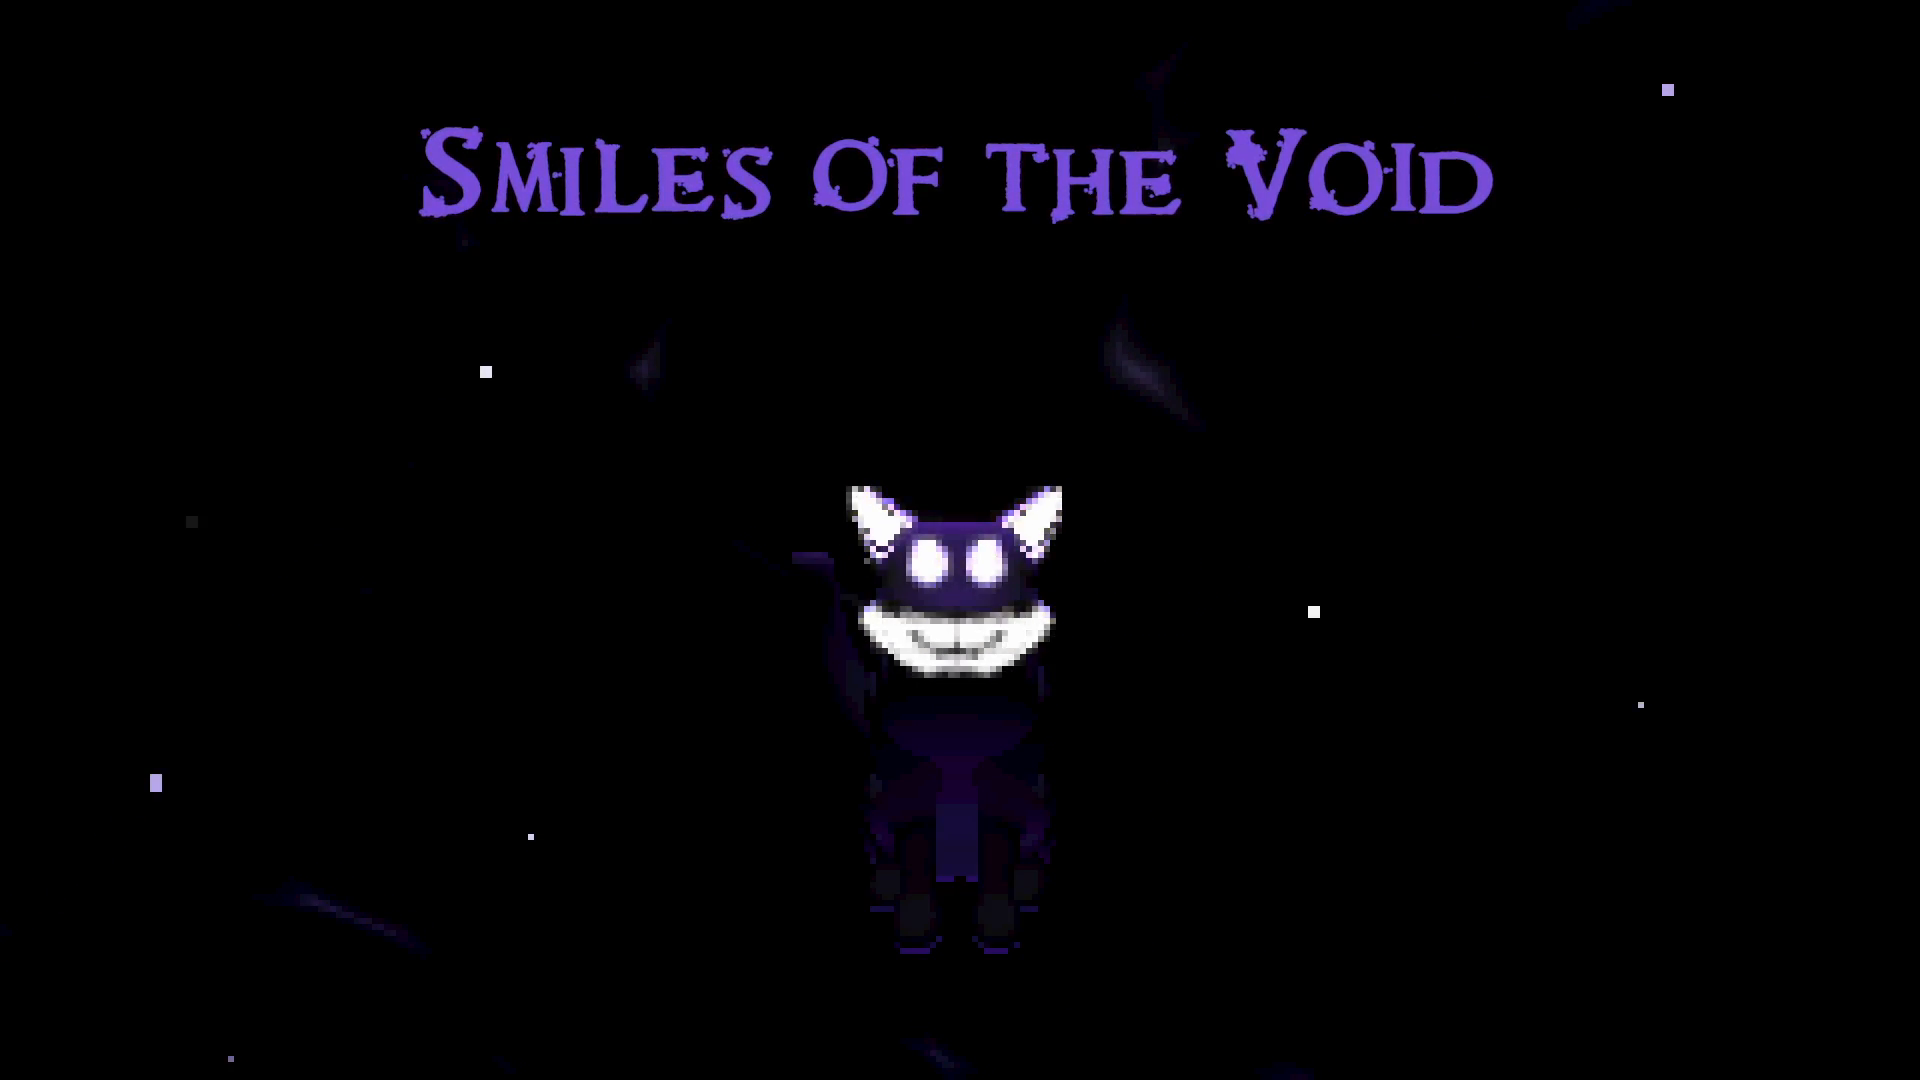 Smiles of the Void